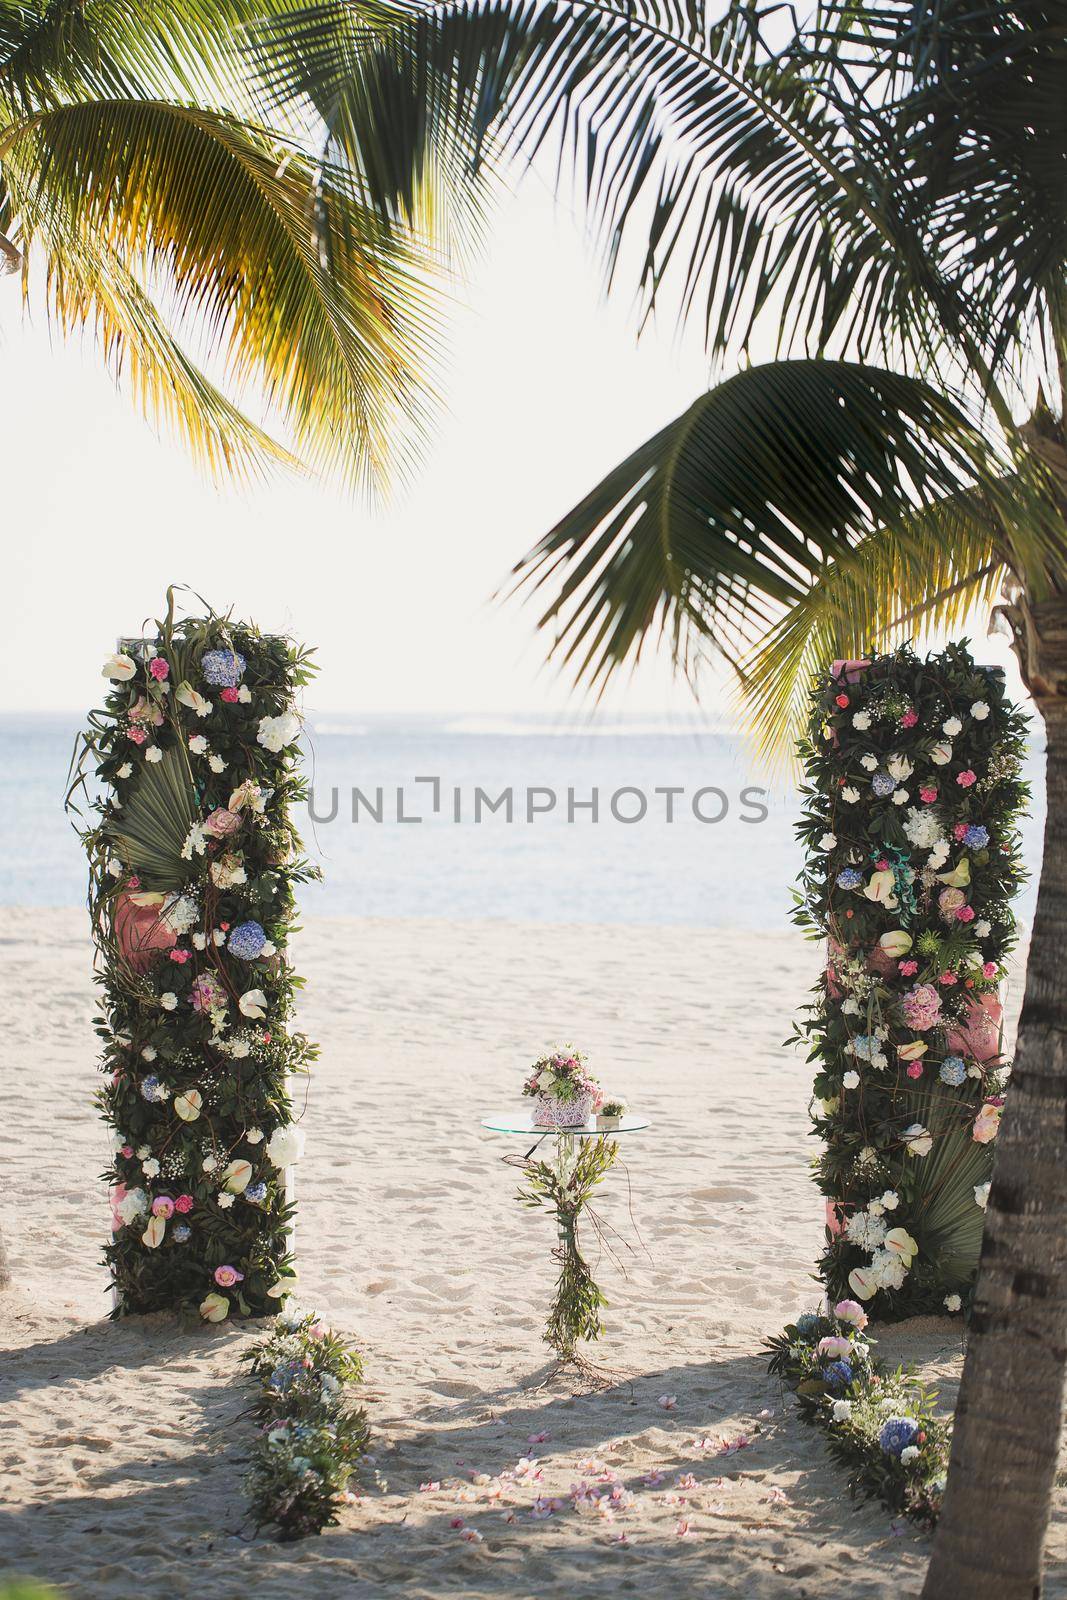 Wedding arch on the beach on the background of the ocean.